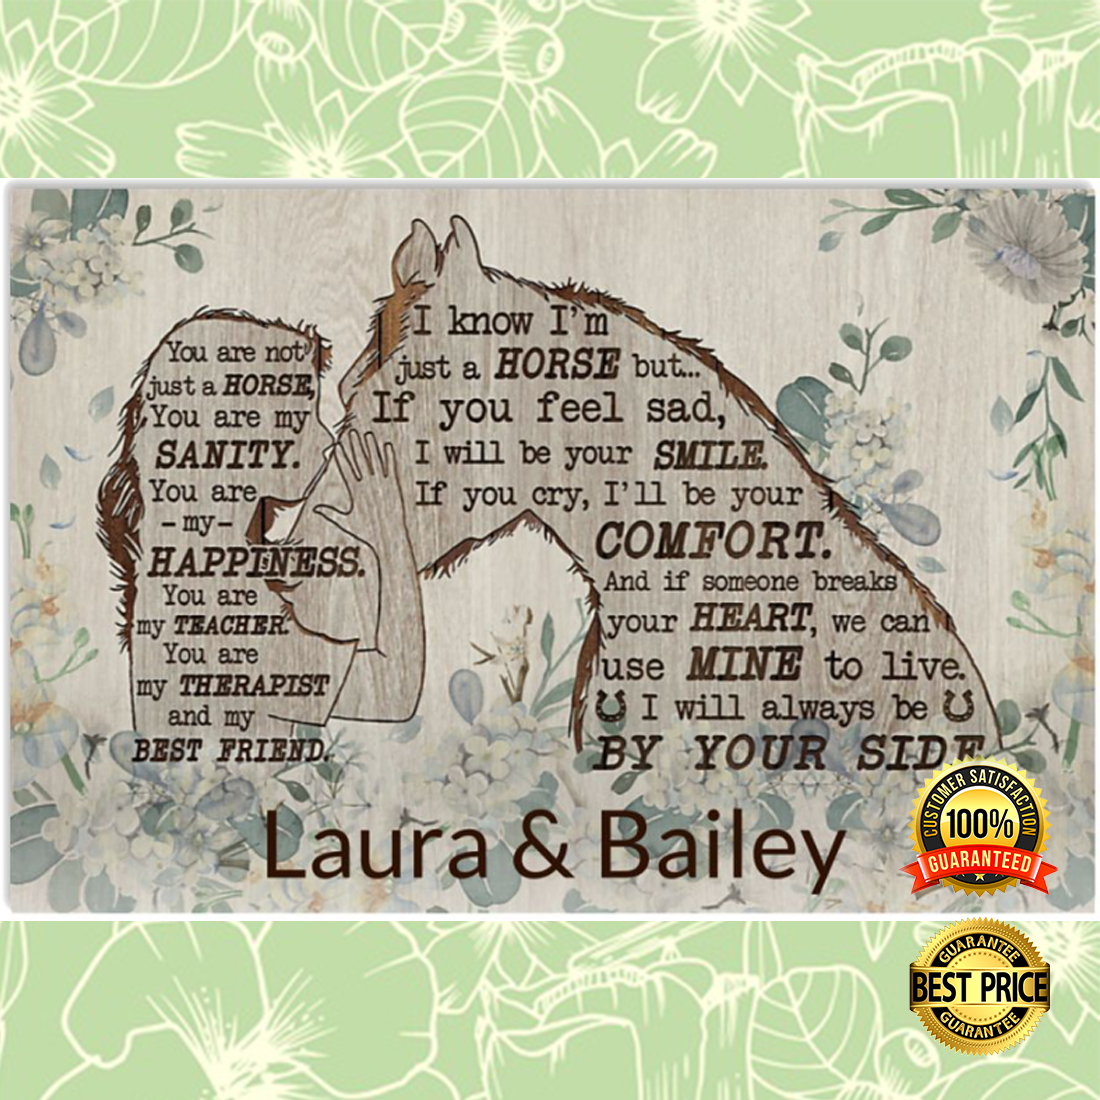 Personalized you are not just a horse poster 5